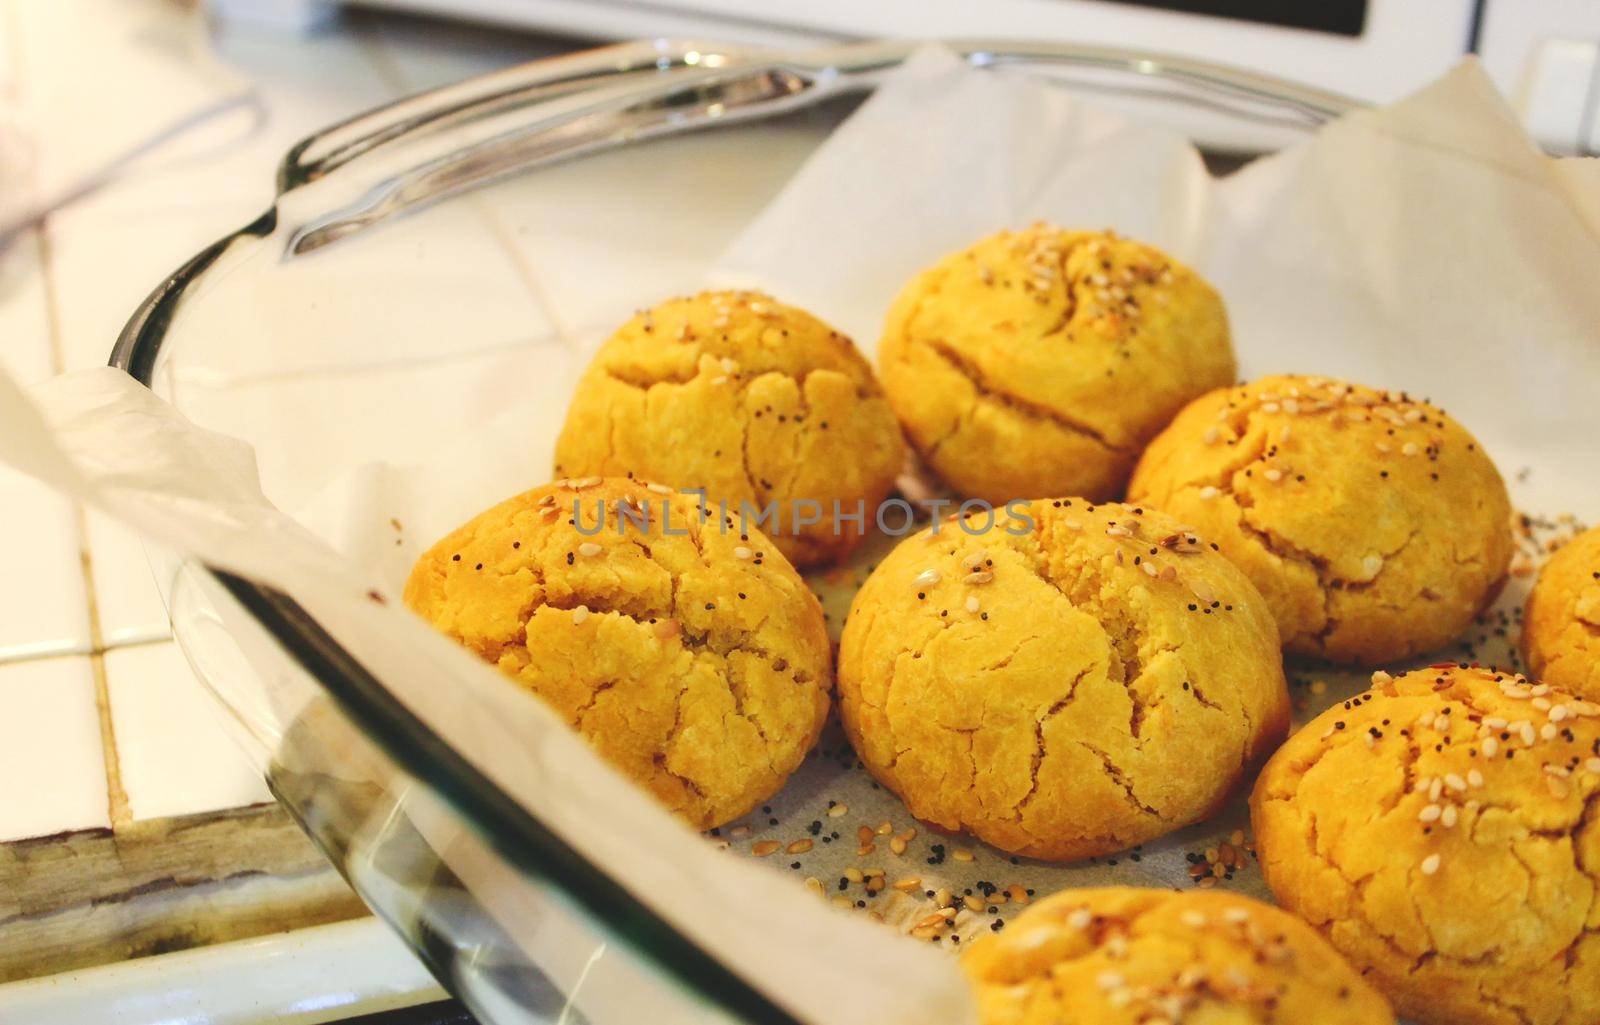 Sweet potato and pumpkin bread rolls freshly baked in a pyrex dish